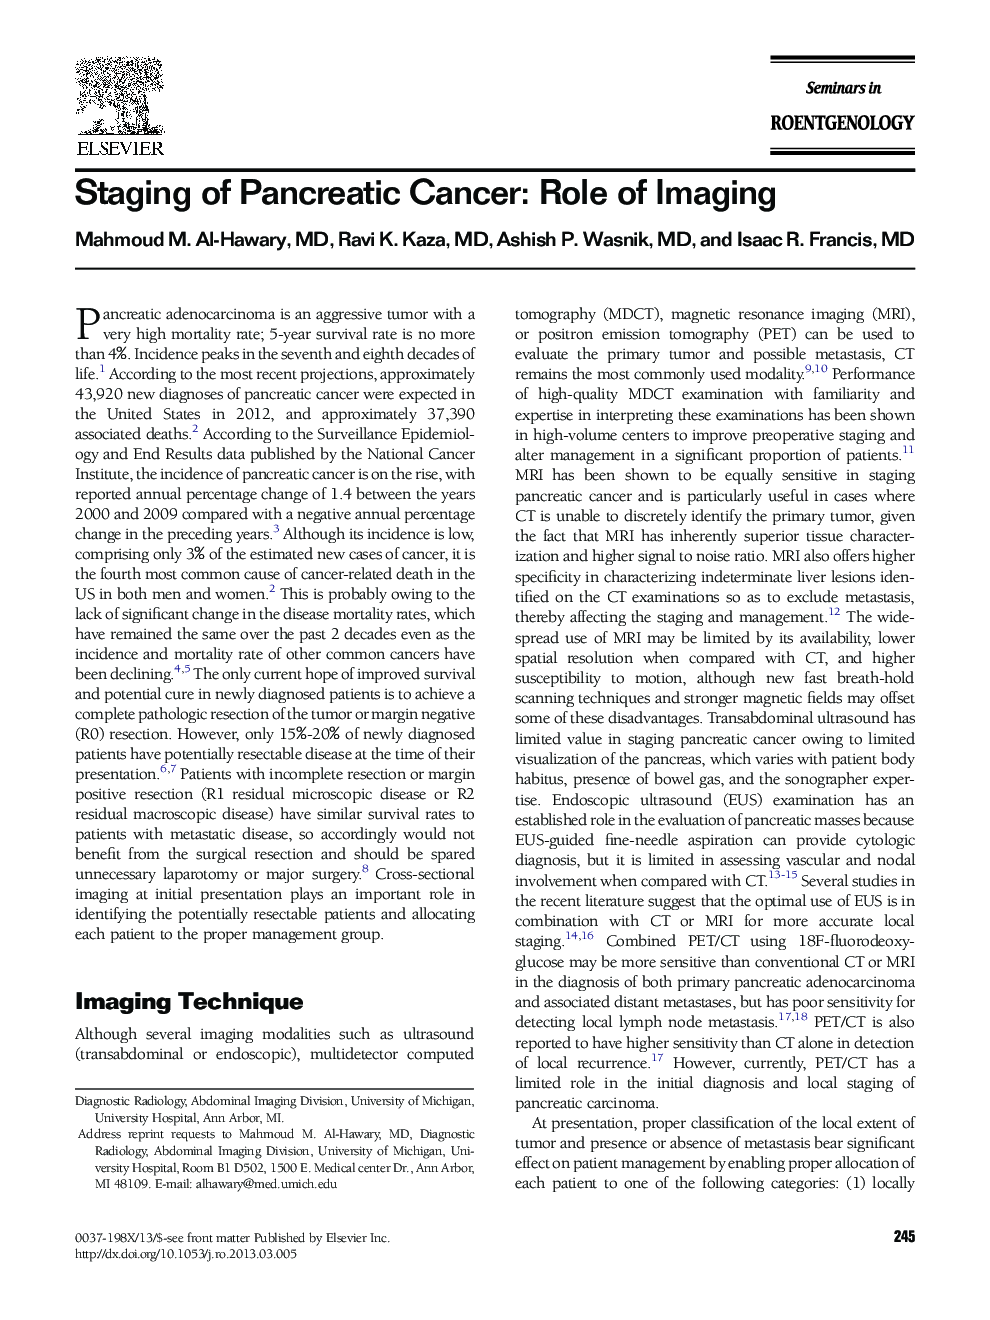 Staging of Pancreatic Cancer: Role of Imaging